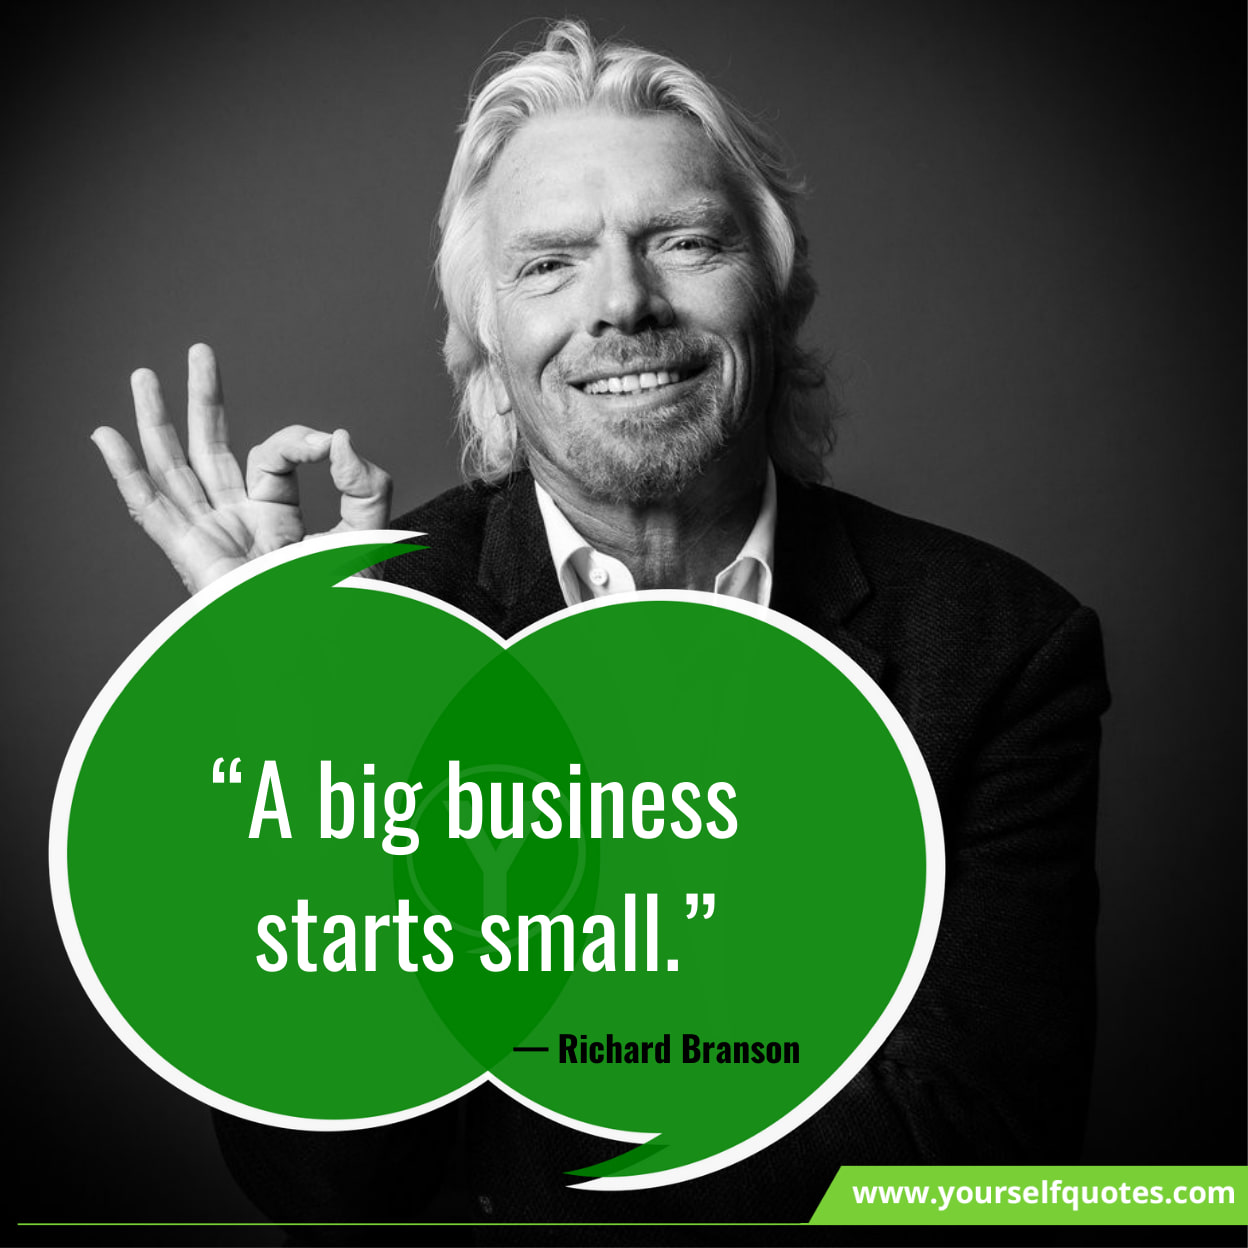 Encouragement Small Business Quotes